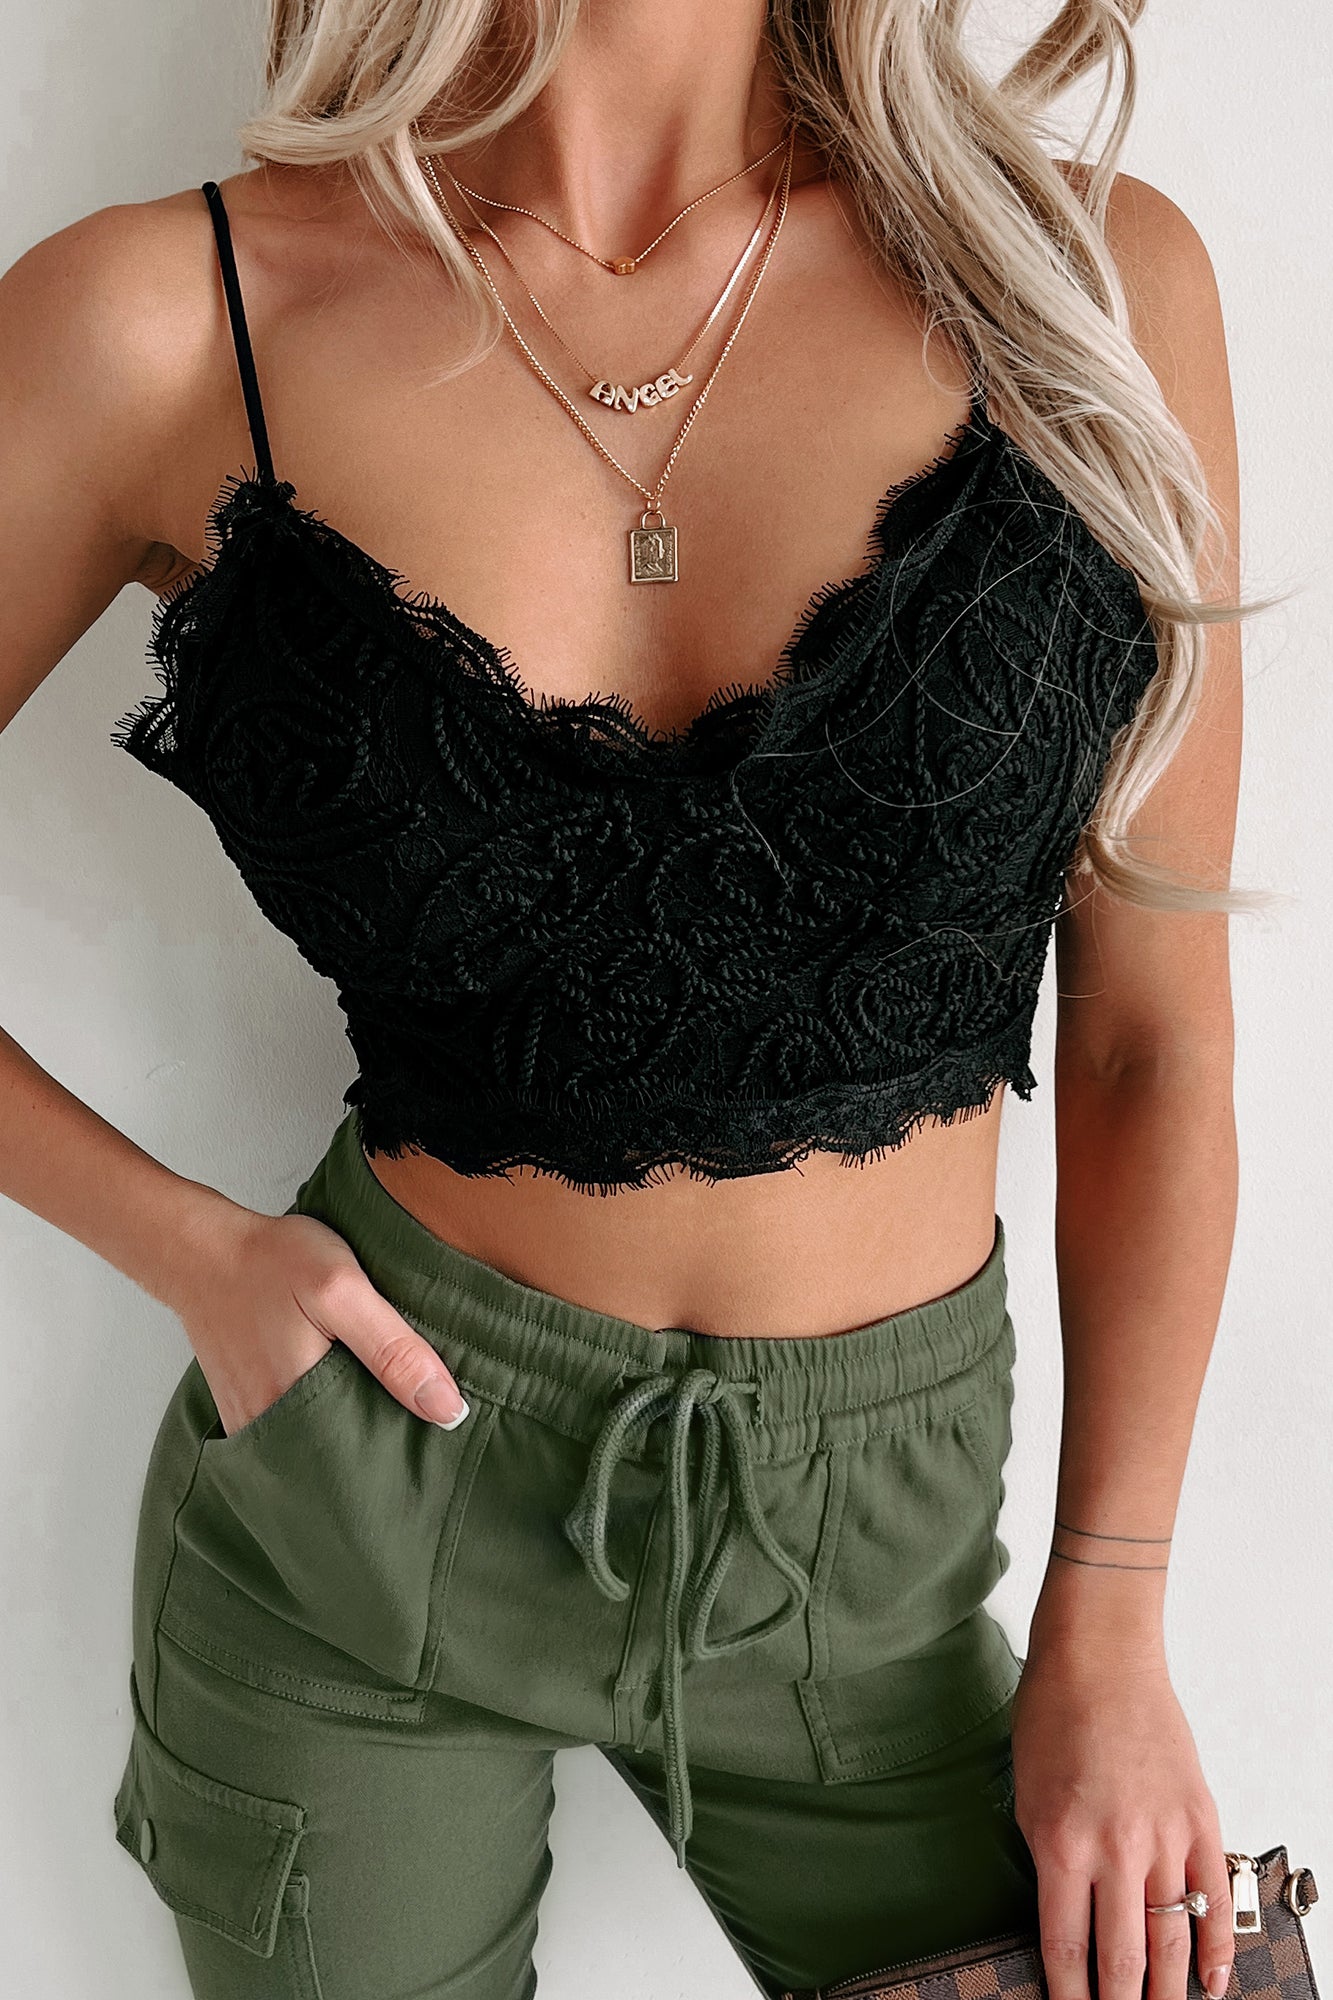 Addicted To The Feeling Textured Lace Bralette Top (Black) - NanaMacs